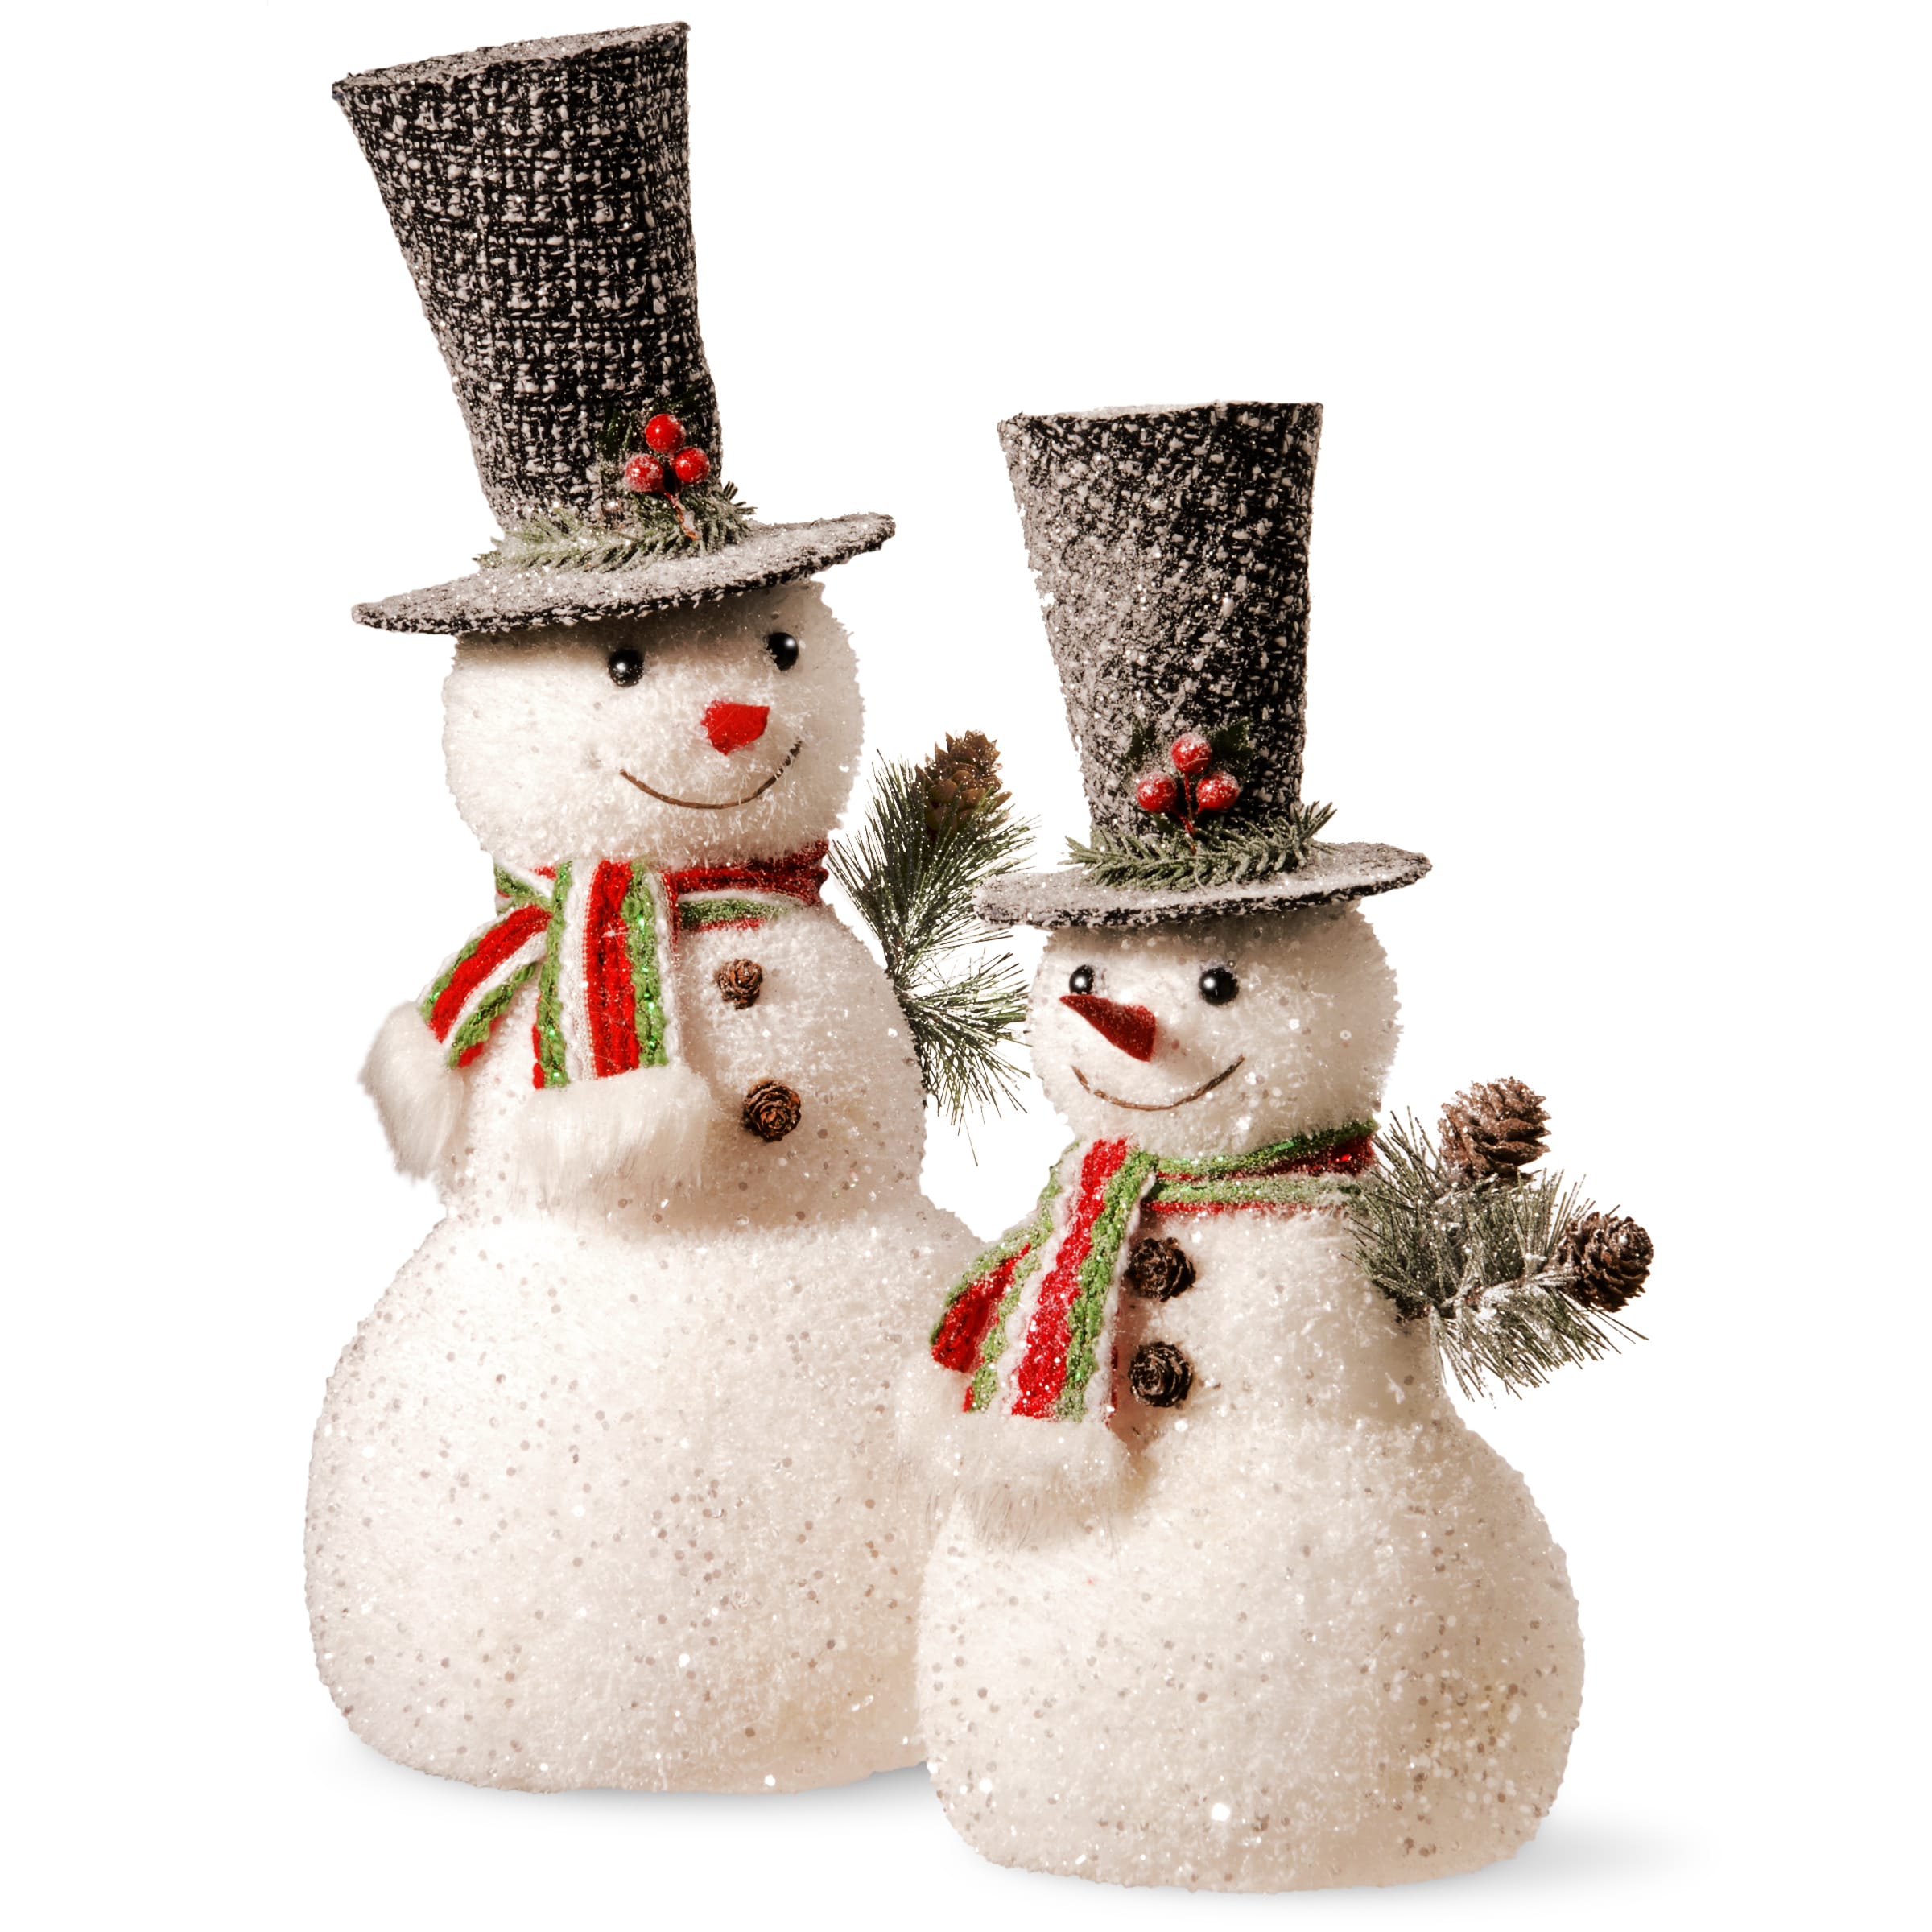 Snowman Decorations – The Artful Roost